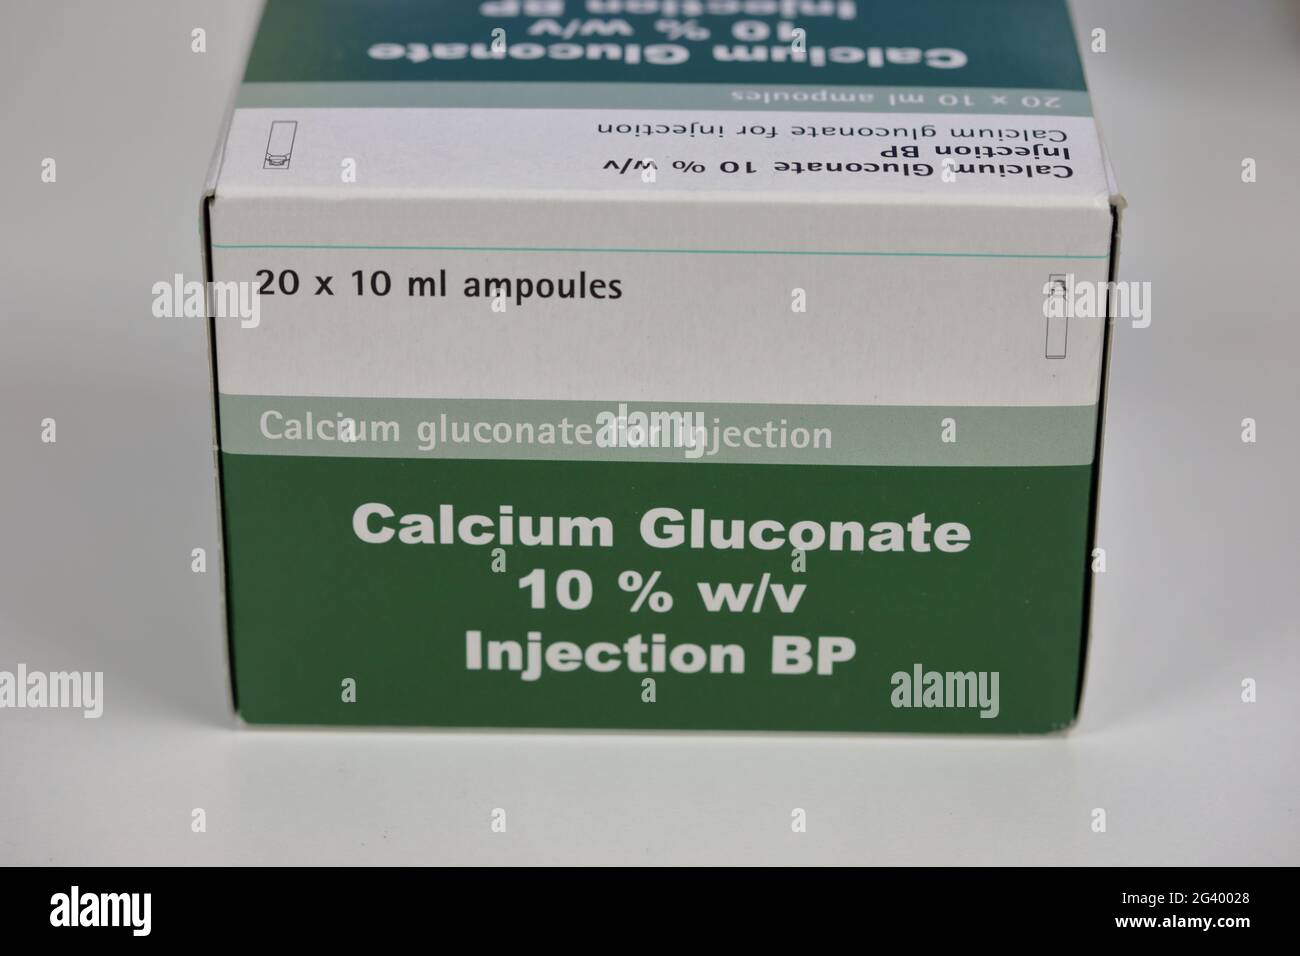 a box of Calcium Gluconate (C12H22CaO14) injection Stock Photo